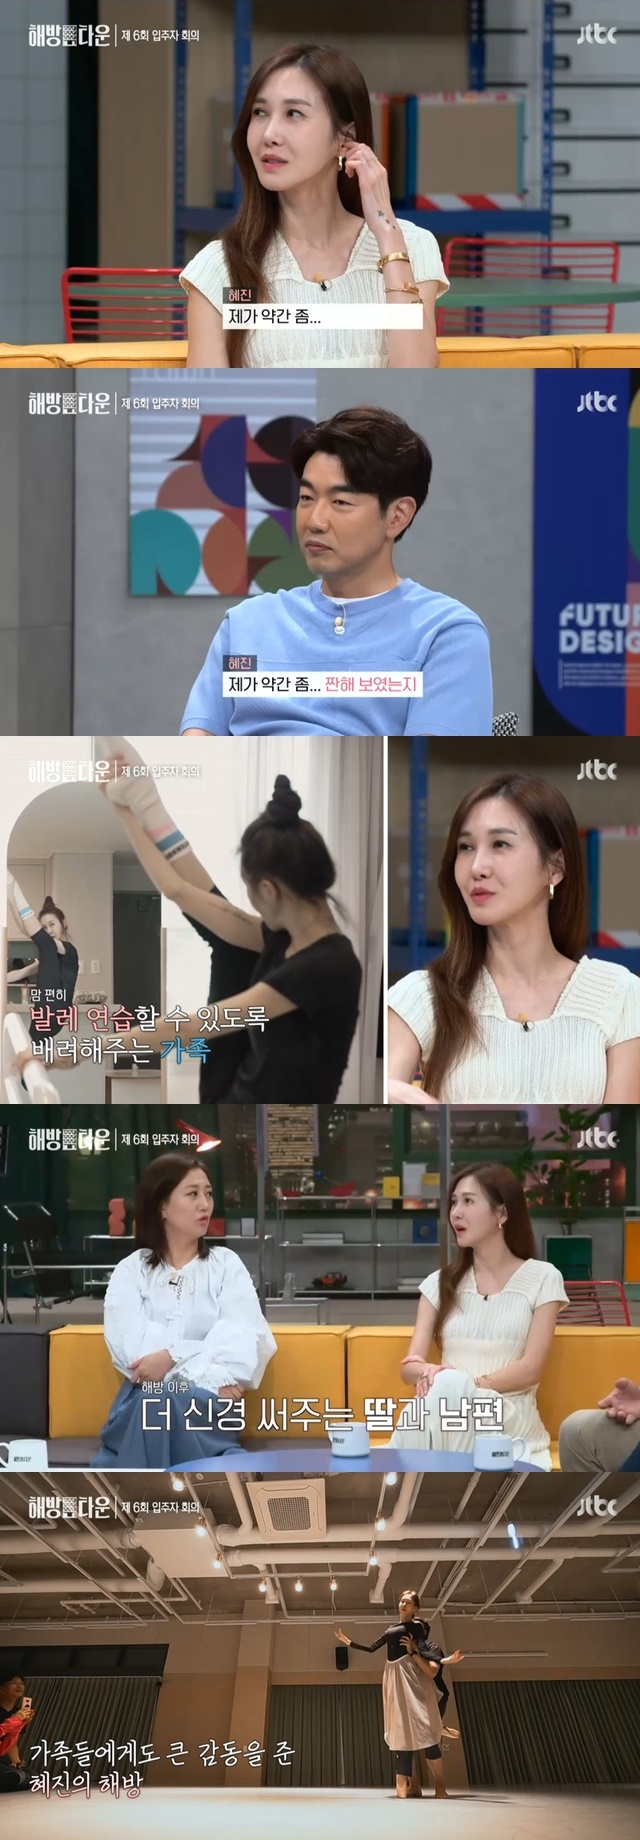 Yoon Hye-jin spoke about her husband and daughters reaction after appearing in Feminist movement Town.On July 6, JTBCs Feminist movement Town where I Return to Me said that Yoon Hye-jin changed after appearing.On this day, Shin Hyun-joon said that his wife wanted to move into the Feminist movement Town, and Yoon Hye-jin understood, How hard it would be to have a baby.Shin Hyun-joon joked, I want to go too far, but you are not famous and you can not go in.He said, I feel so interesting and fun to live when I try something I have not done. Jang Yoon-jung said, I look good in trying to do it.Many people say that it is not the Feminist movement of Hur Jae, but the Feminist movement of his wife. 